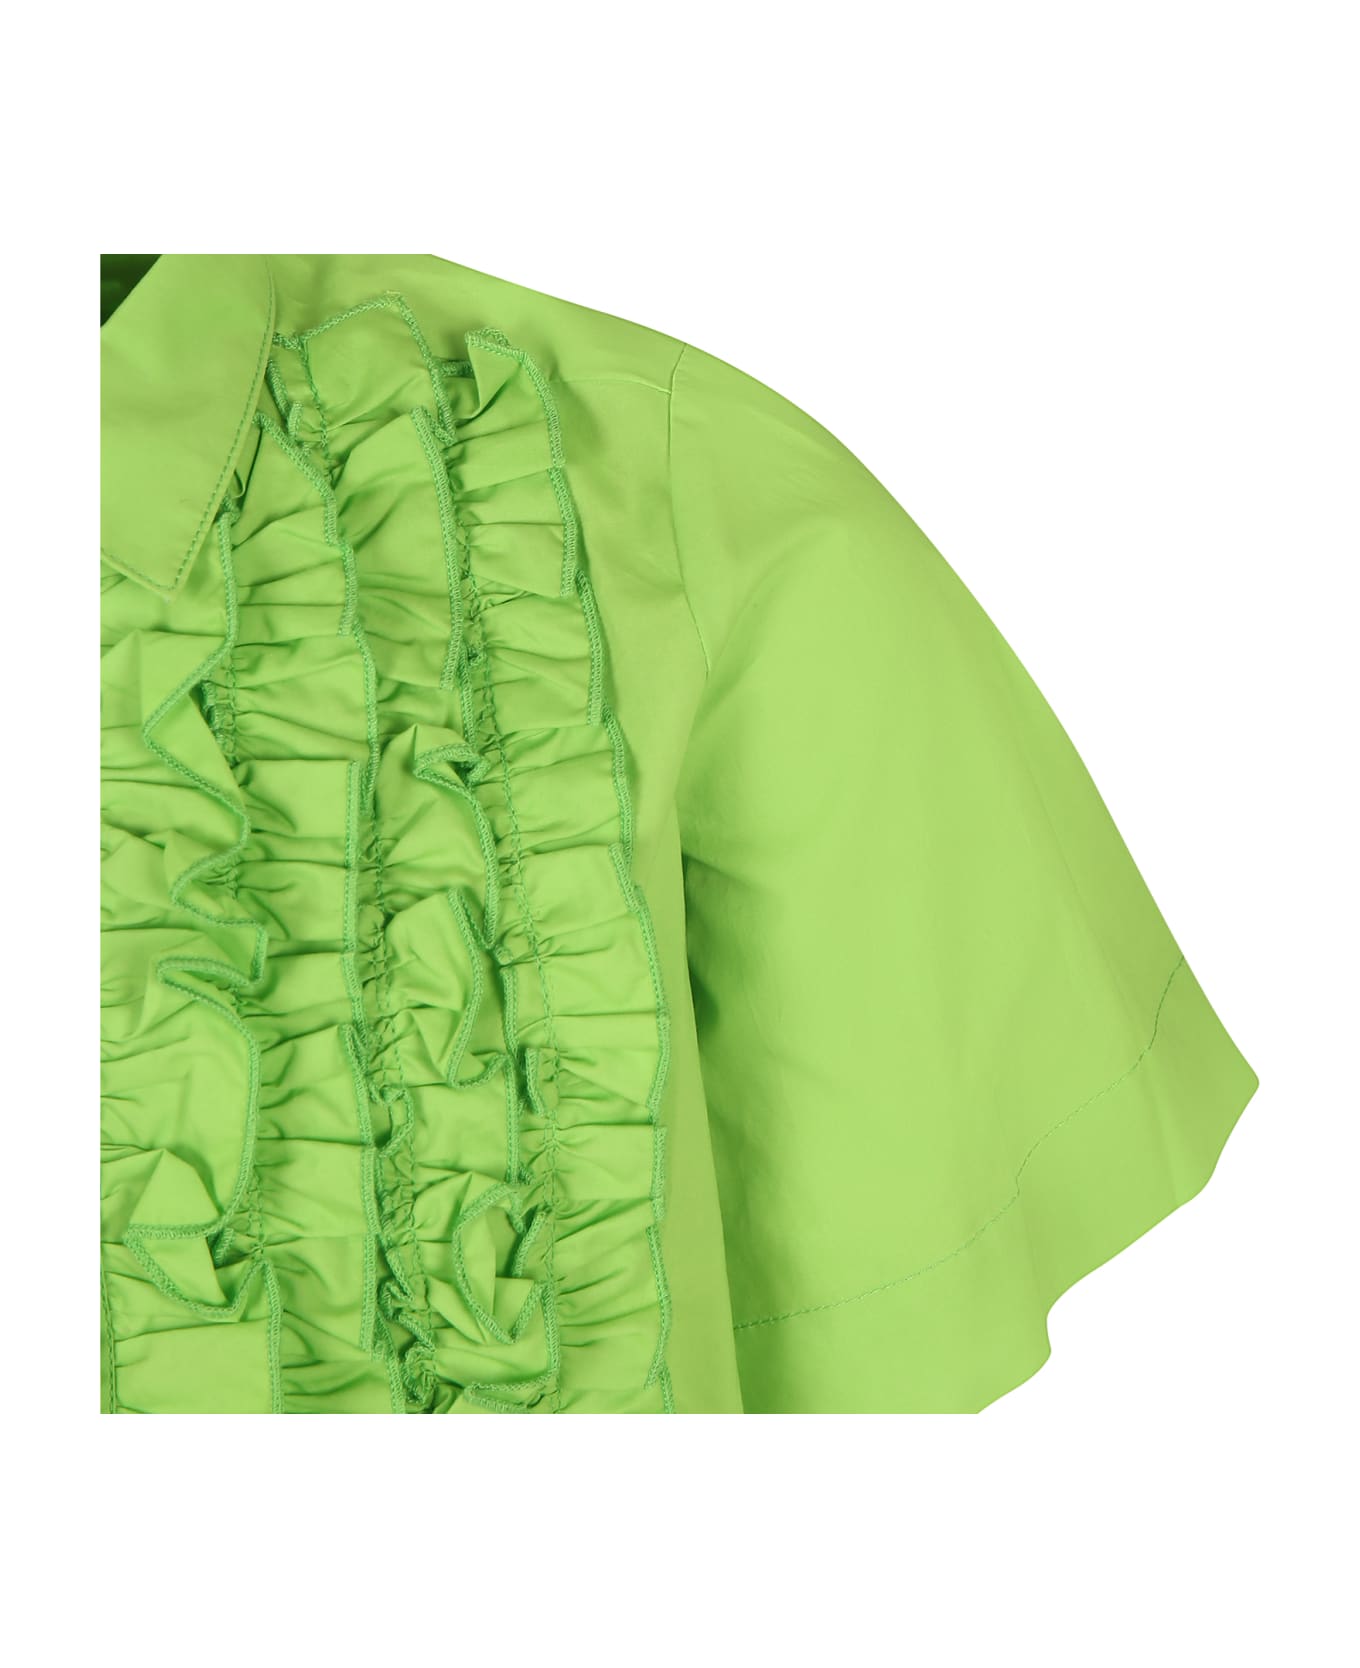 MSGM Green Shirt For Girl With Logo - Green